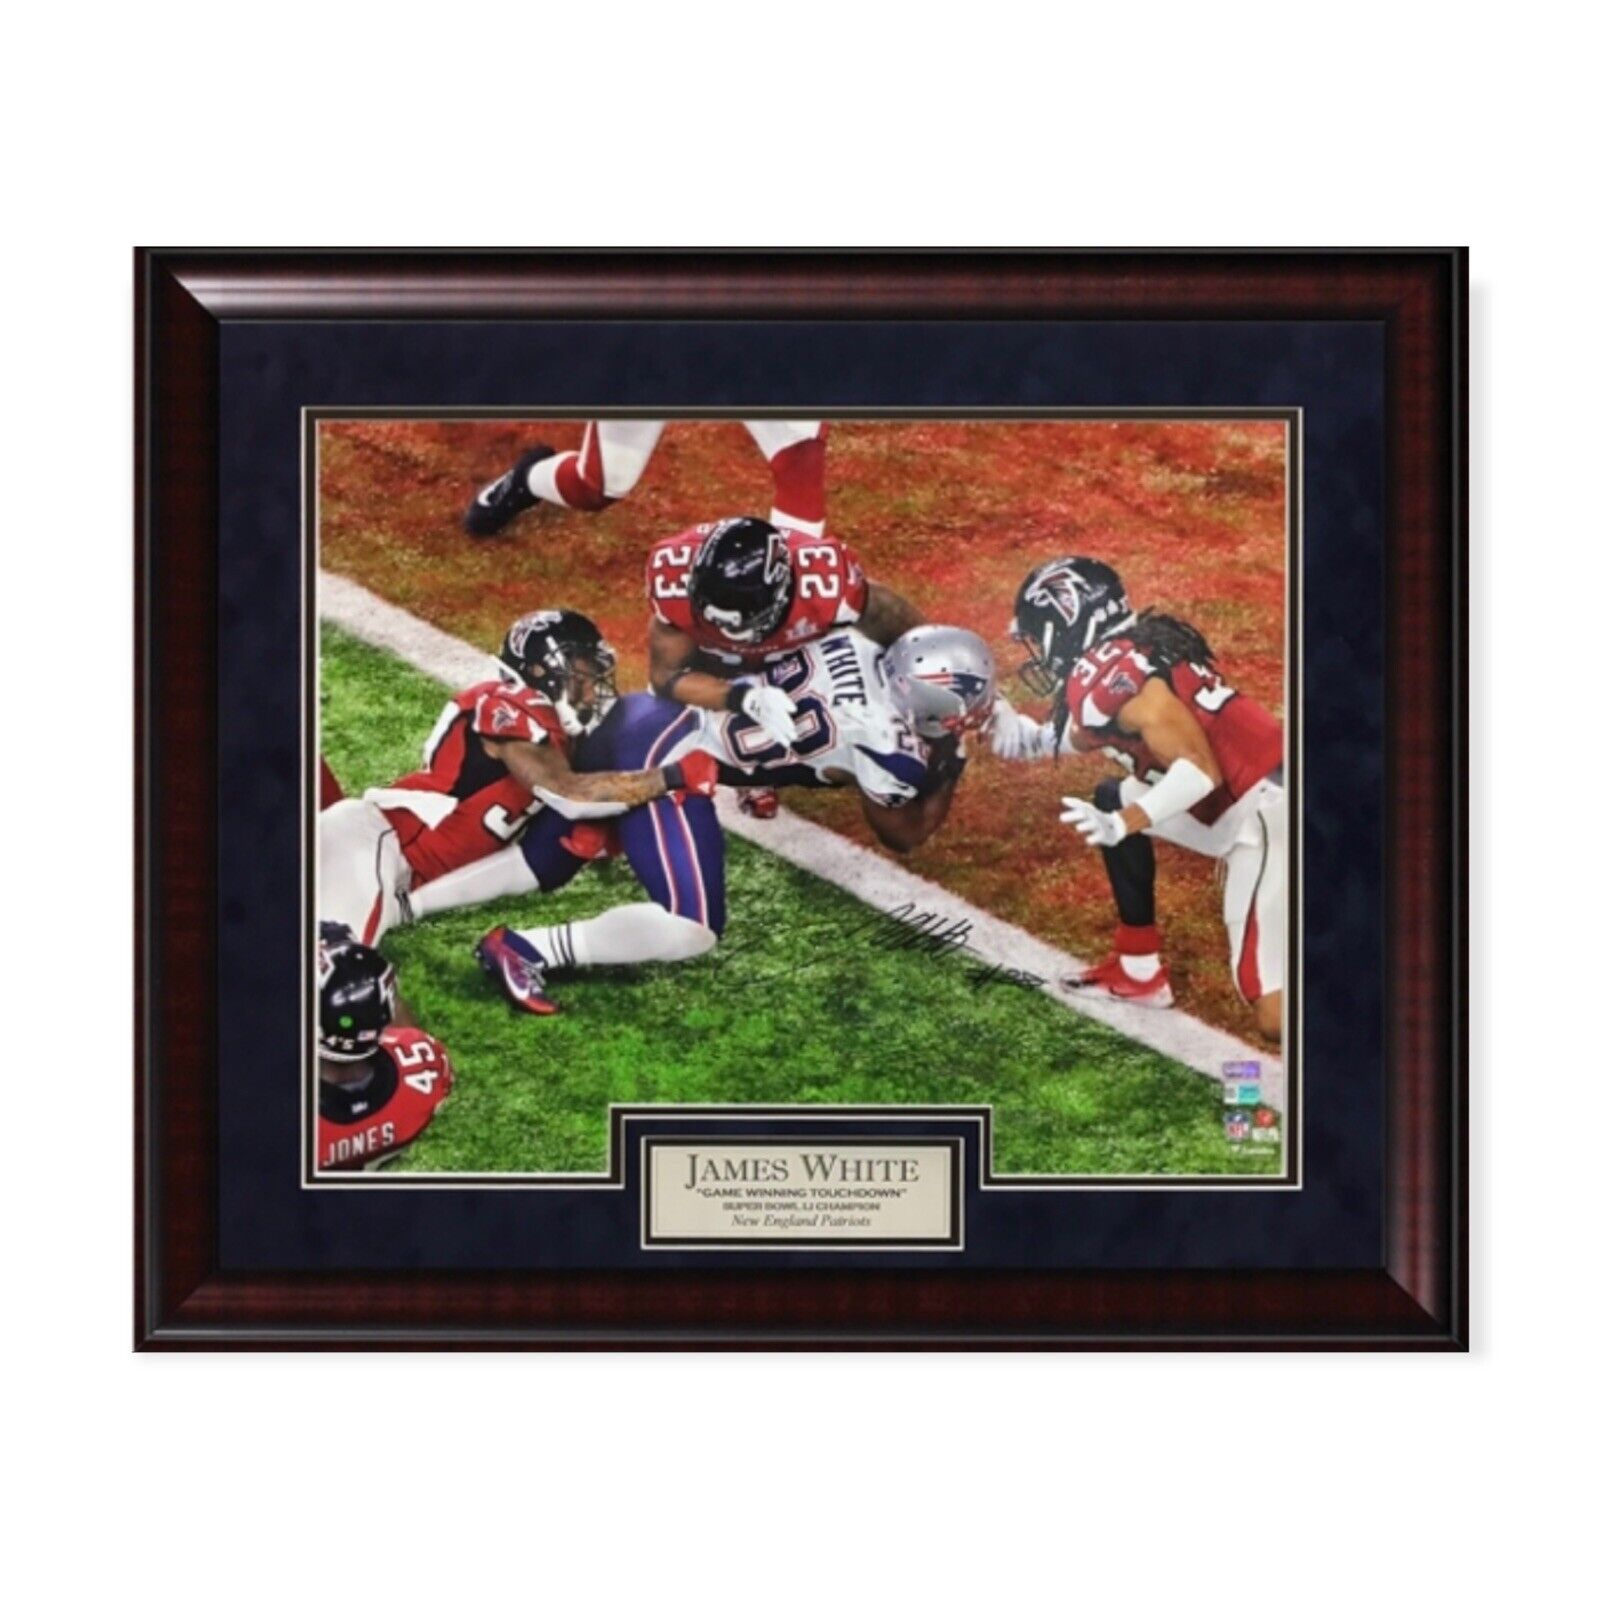 James White Signed Autographed 16×20 Photograph Framed To 20×24 Fanatics